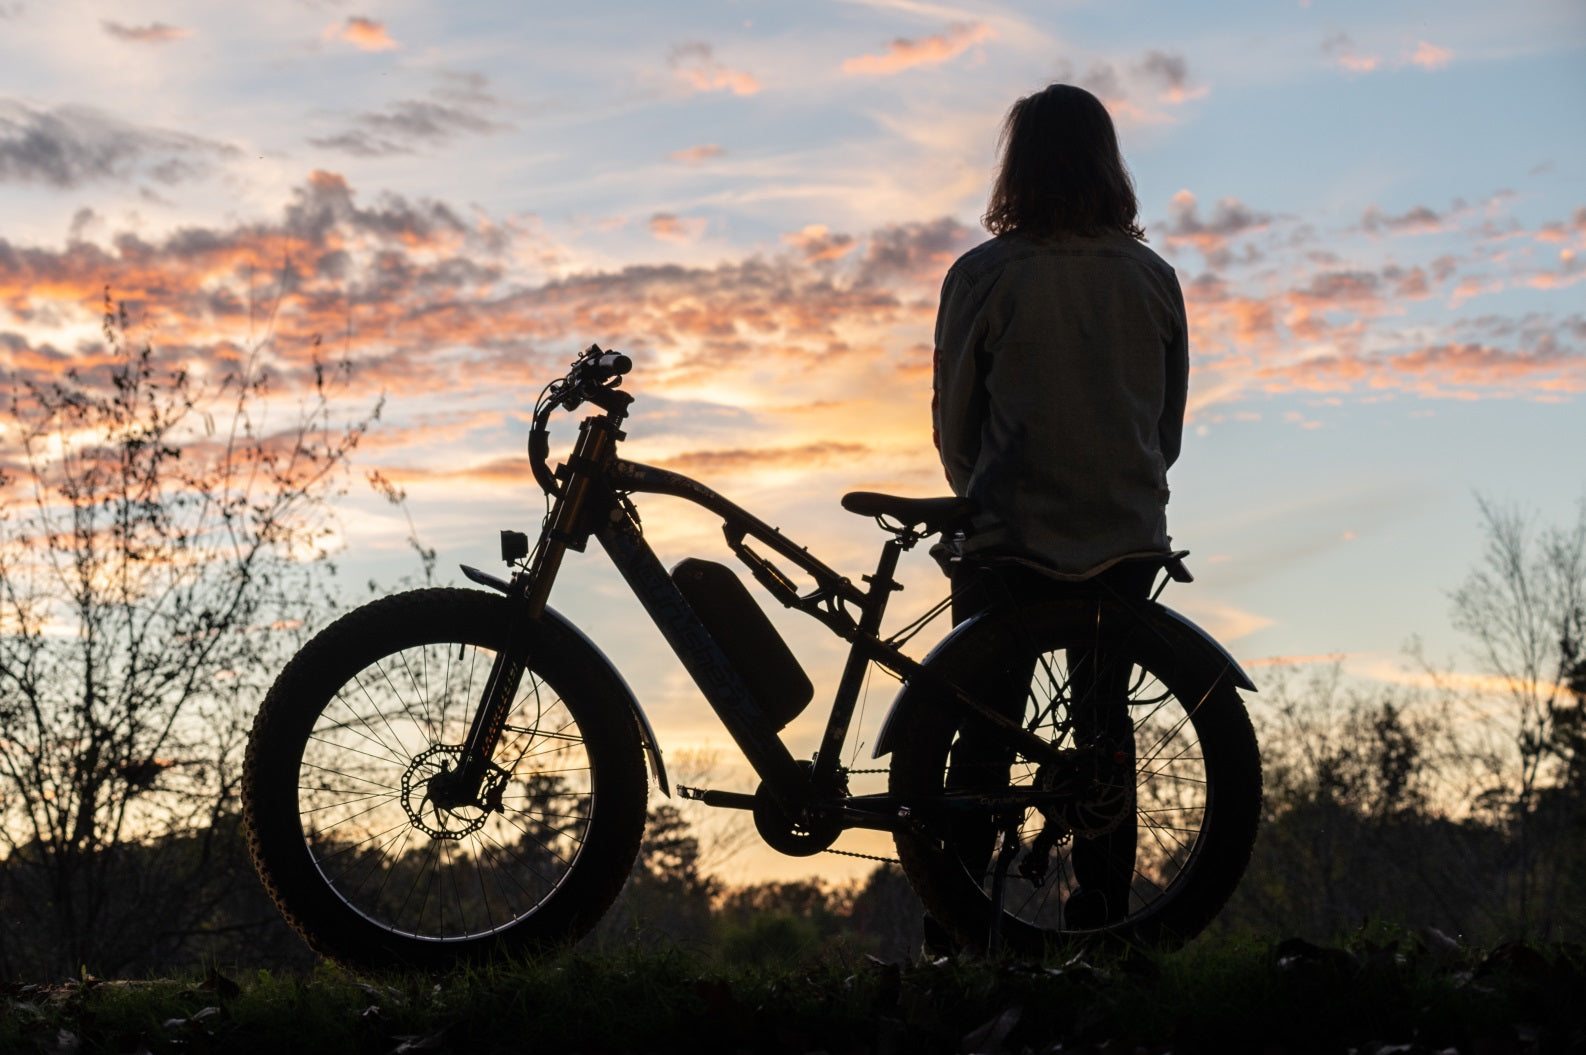 Looking at the scenery at sunset with his e-bike